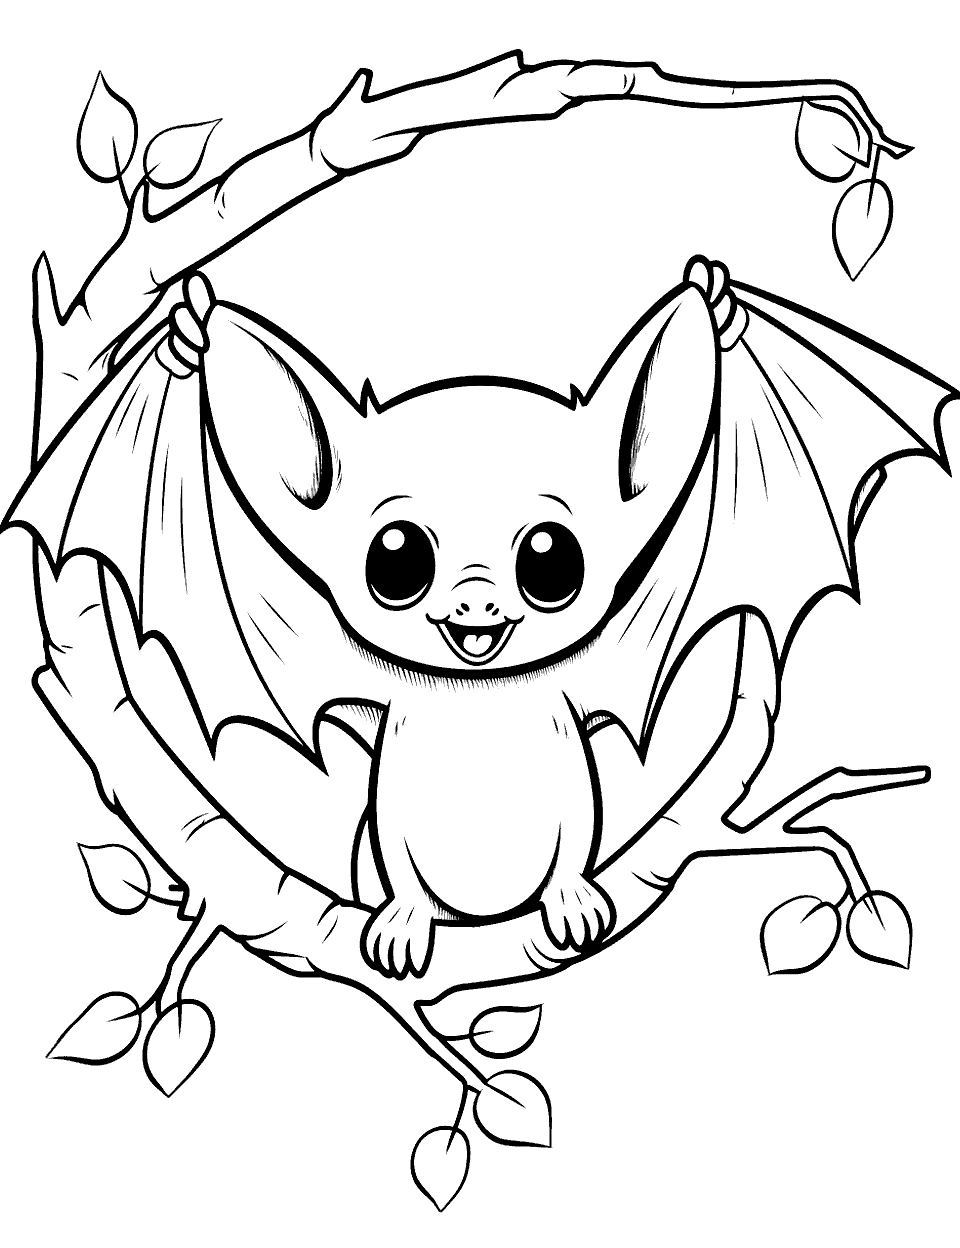 Cute Bat Hanging on a Tree Coloring Page - A small, adorable bat with big eyes sitting on a tree branch.